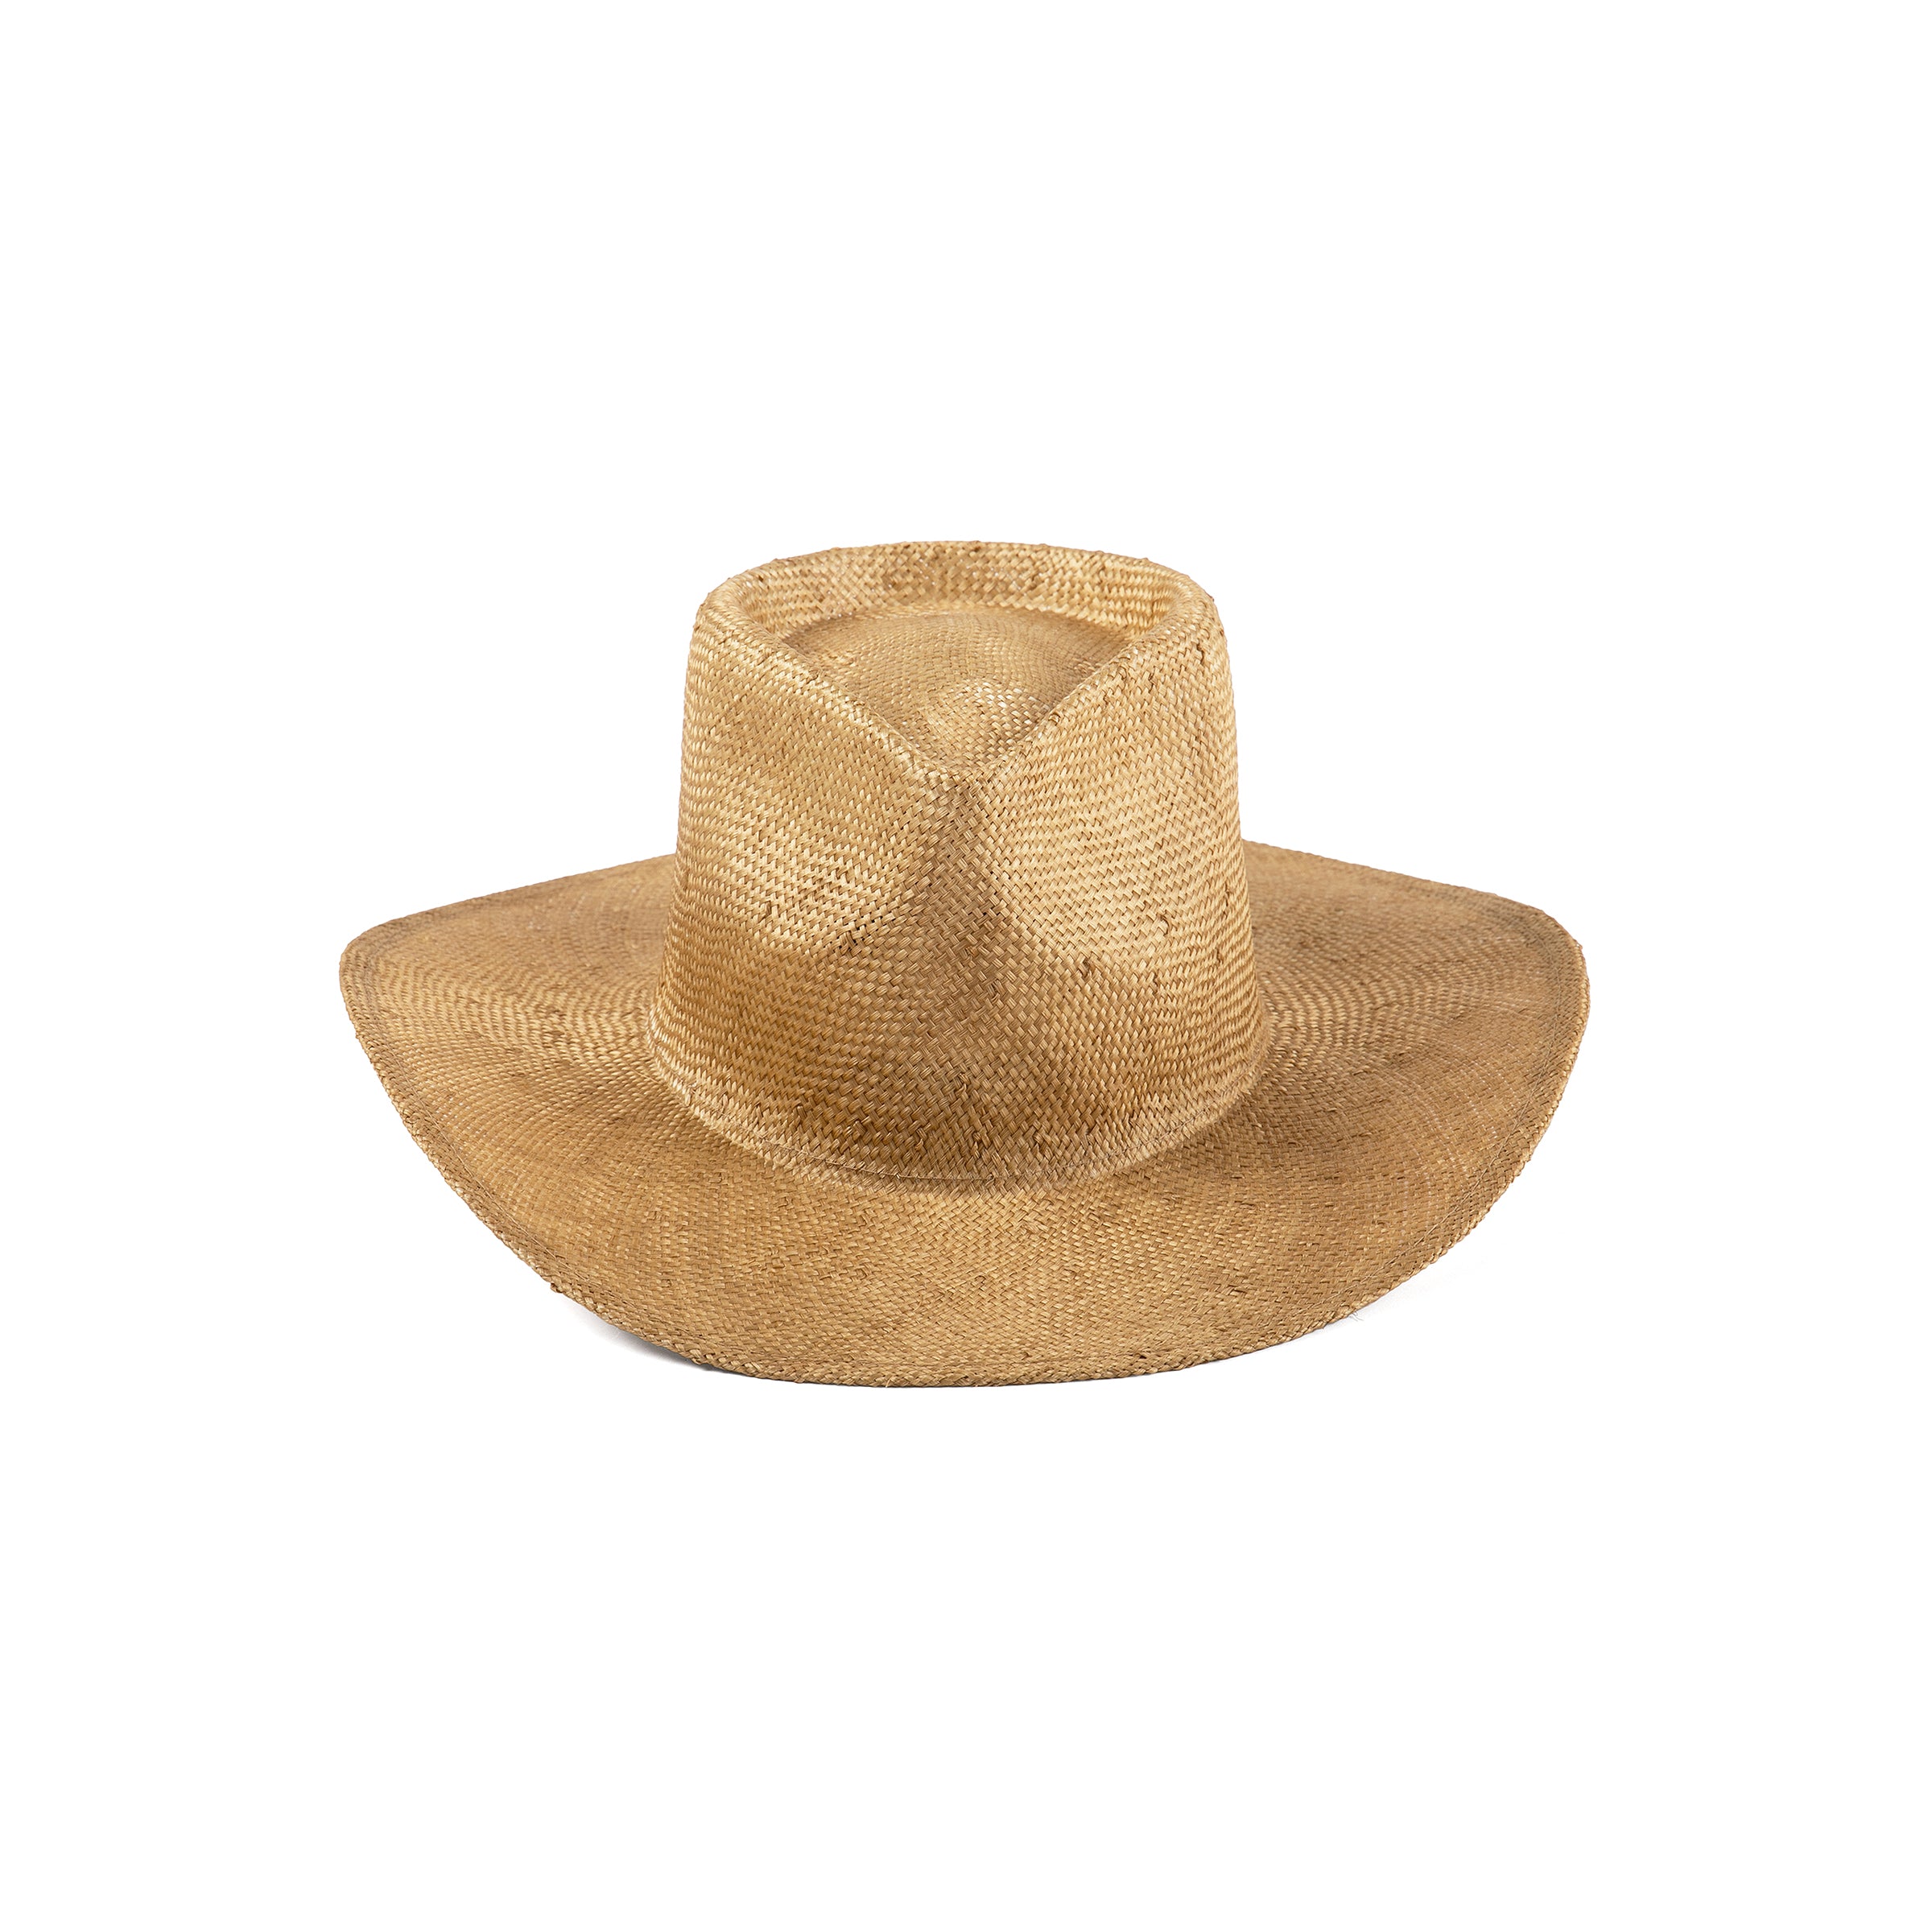 The Oasis - Straw Fedora Hat in Brown | Lack of Color US